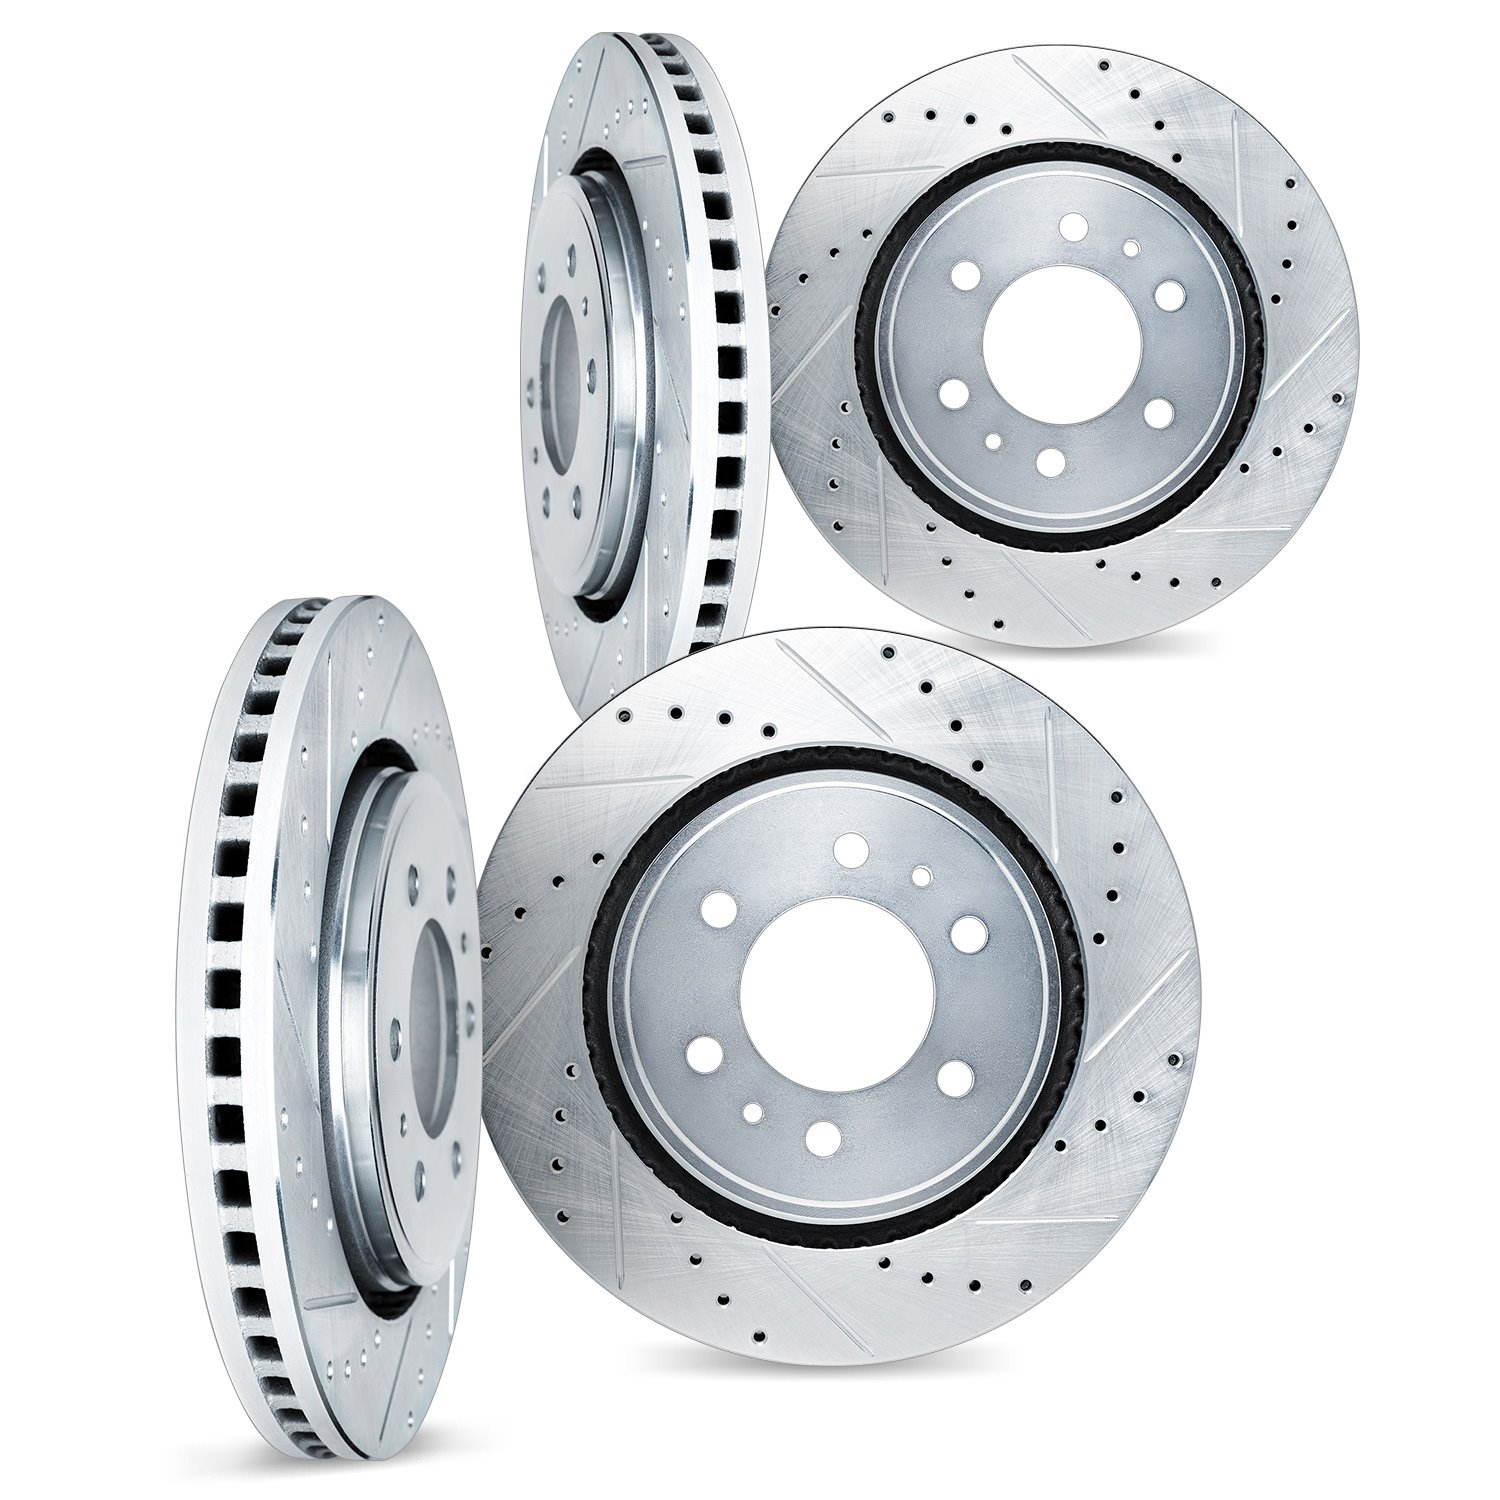 Drilled/Slotted Brake Rotors [Silver], 2001-2007 Lexus/Toyota/Scion